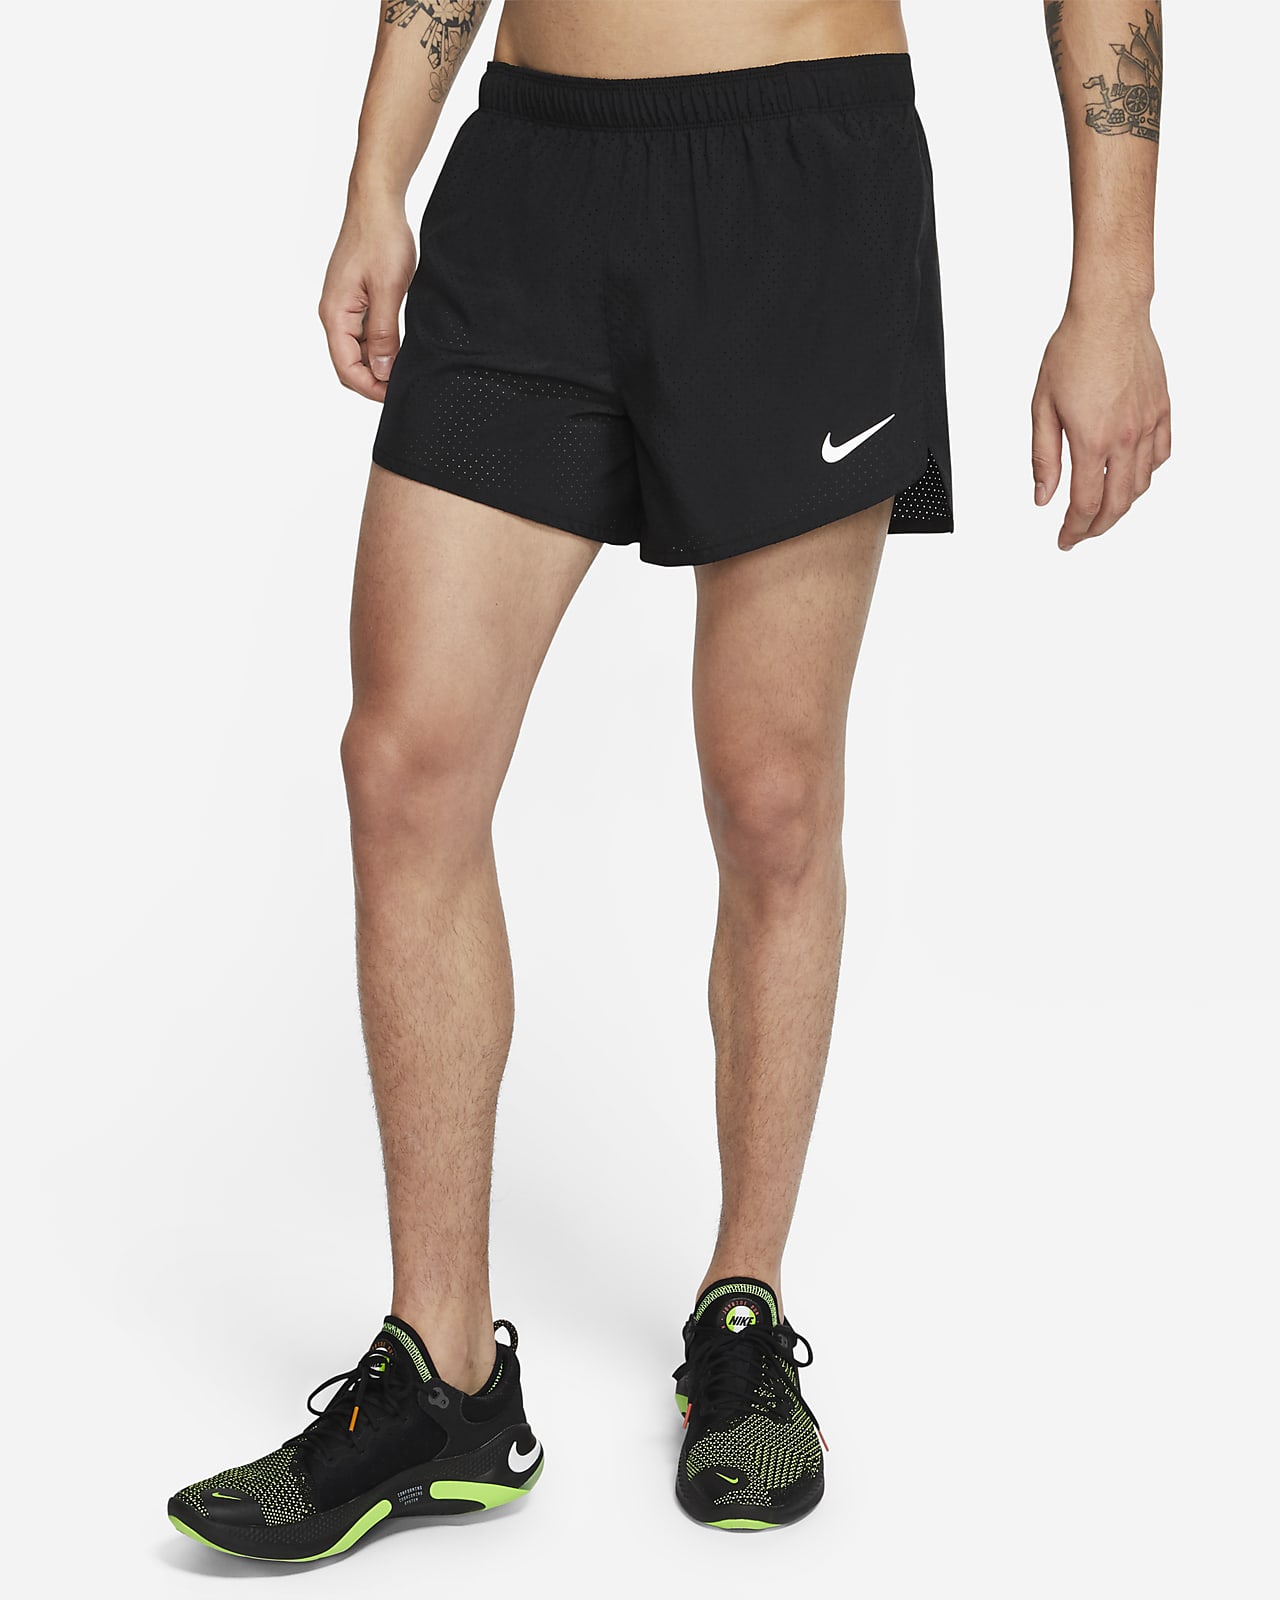 Nike Fast Men's 4" Lined Racing Shorts